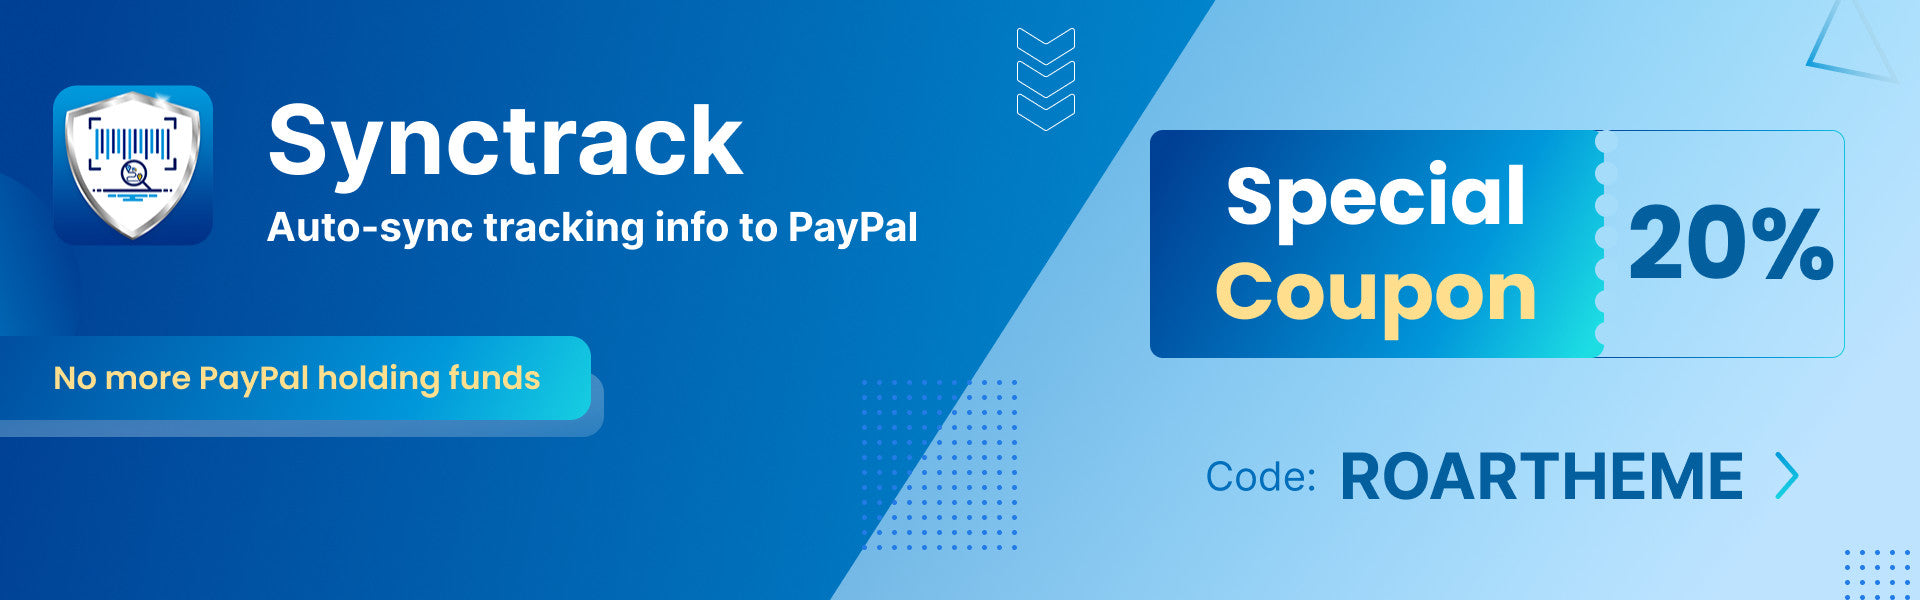 Synctrack Sync PayPal Tracking